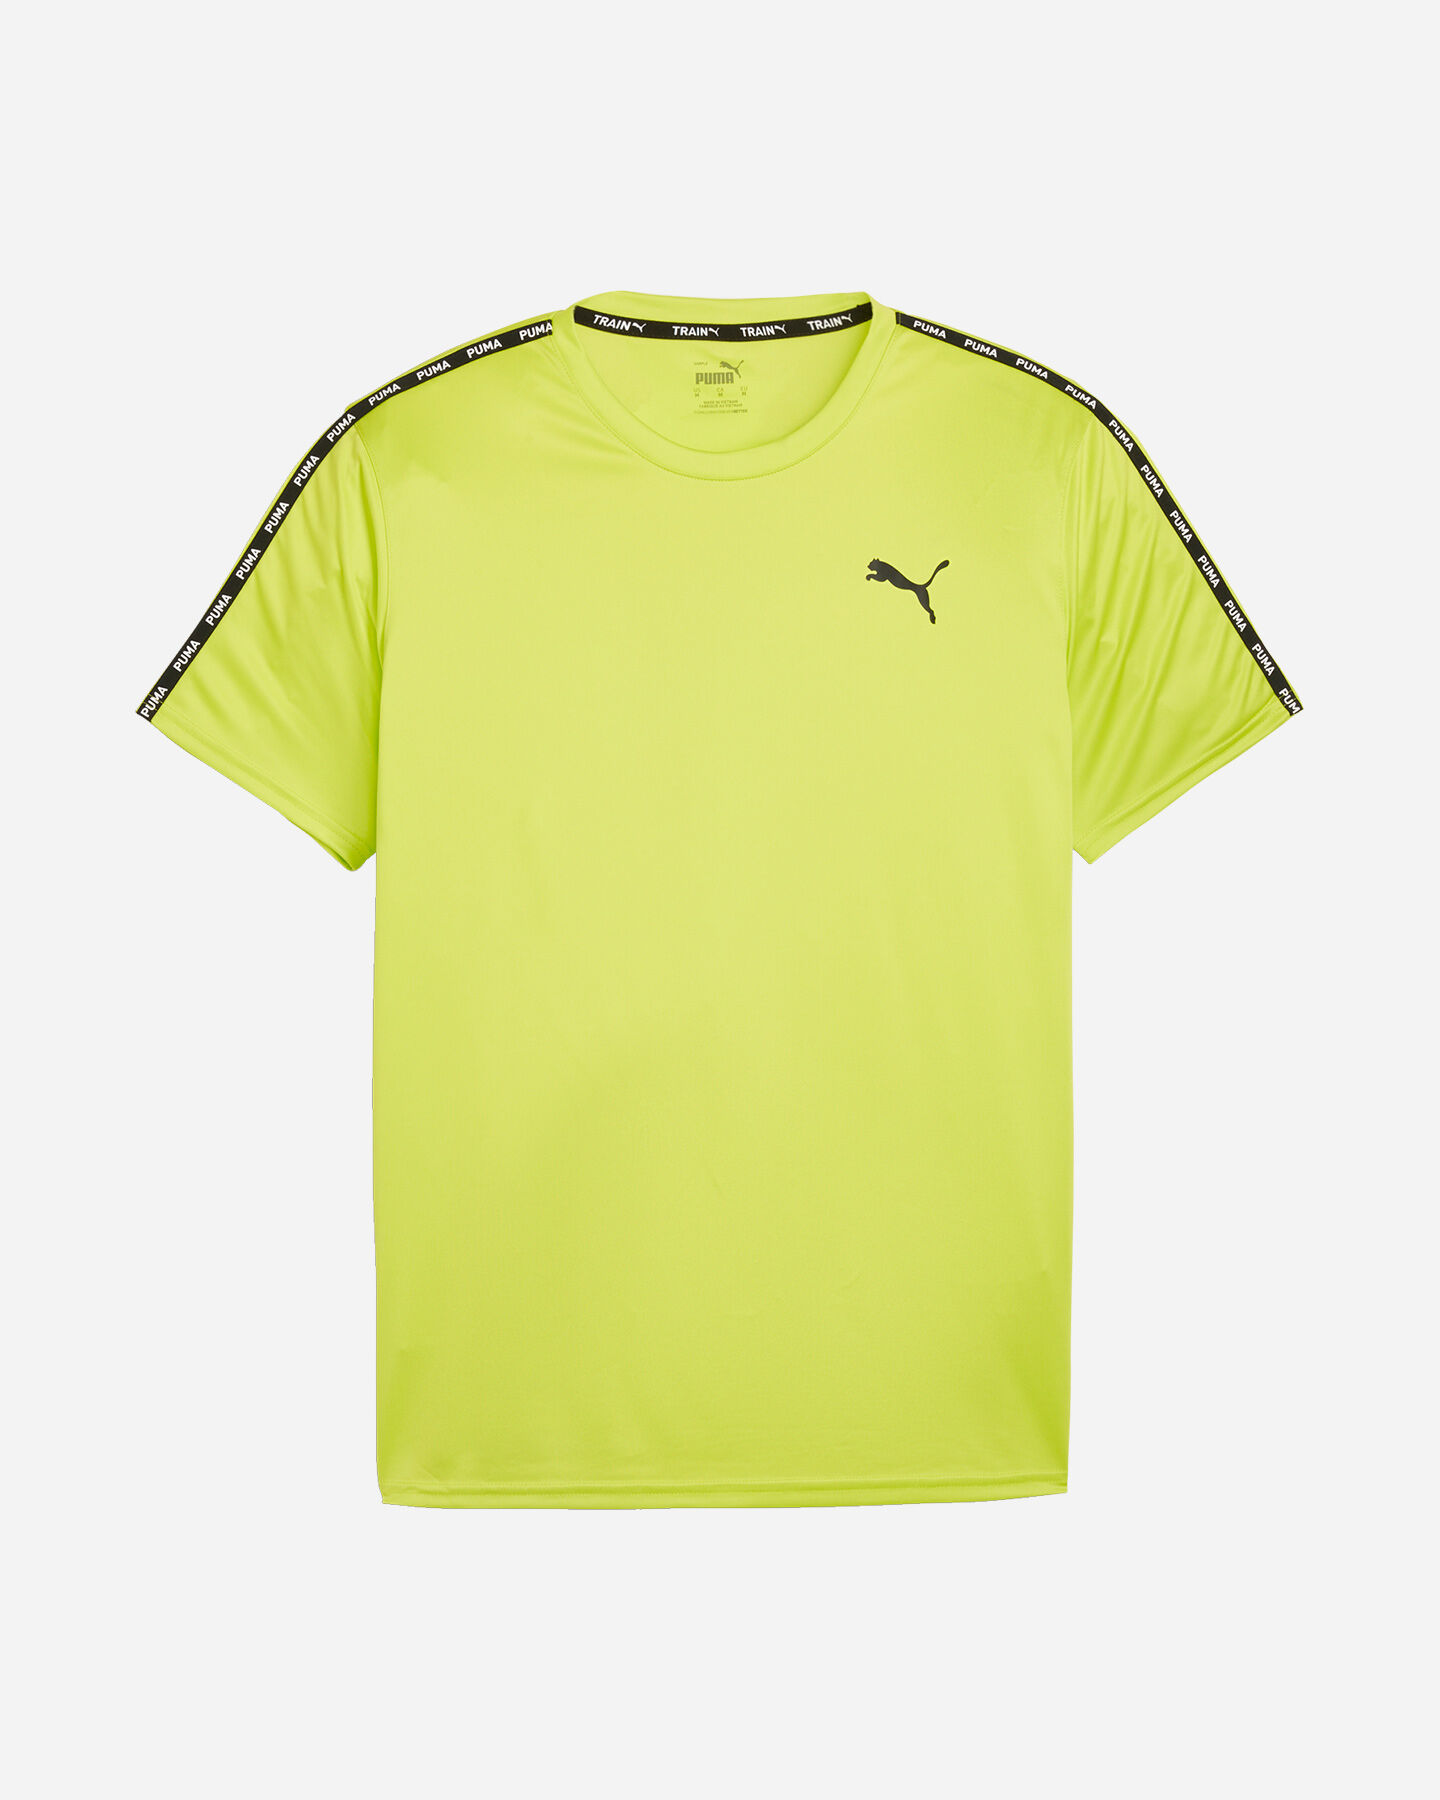  T-Shirt training PUMA FIT TAPED M S5661694|39|S scatto 0